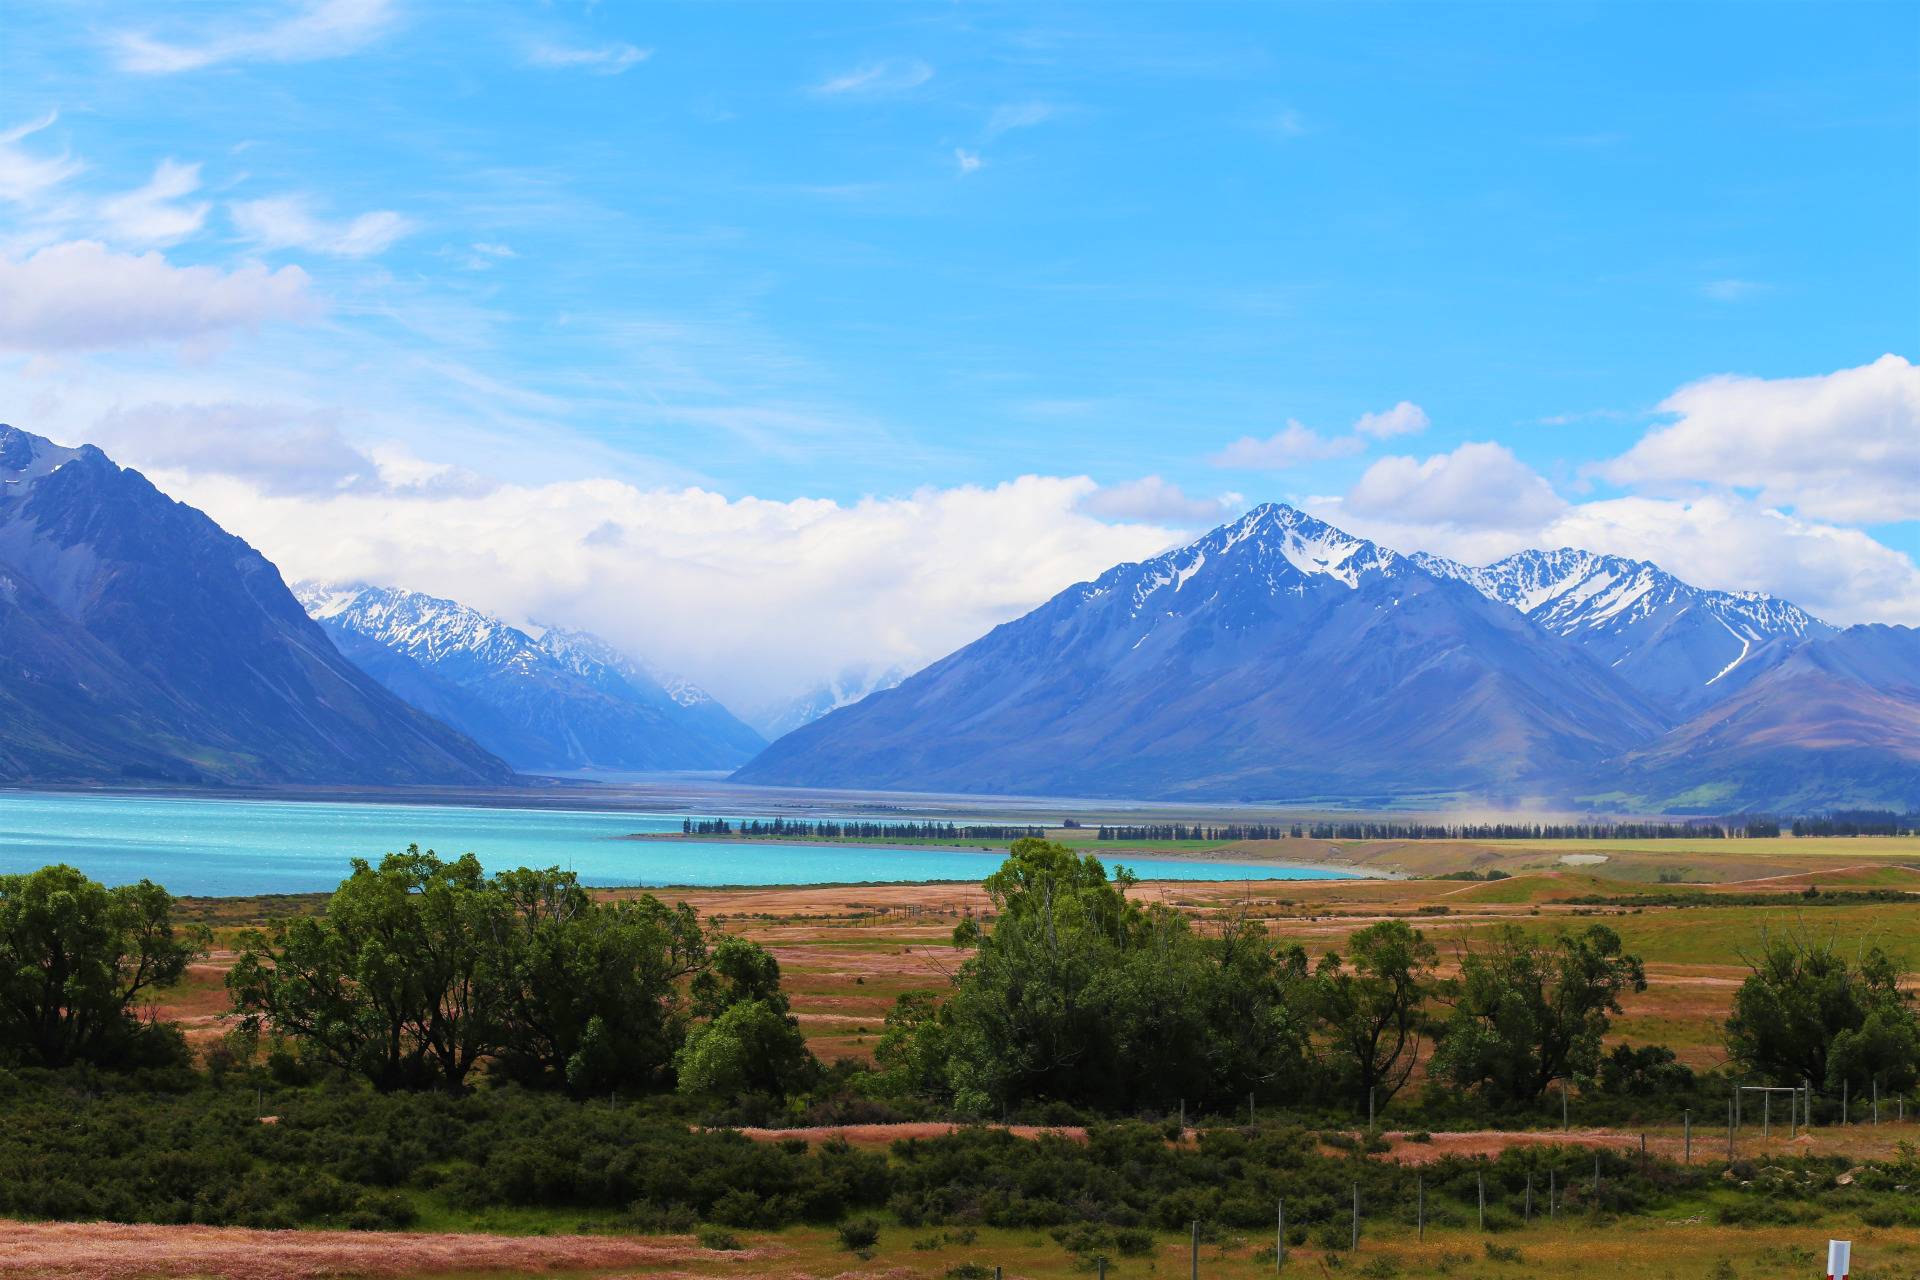 Such beatutiful landscapes in New Zealand!